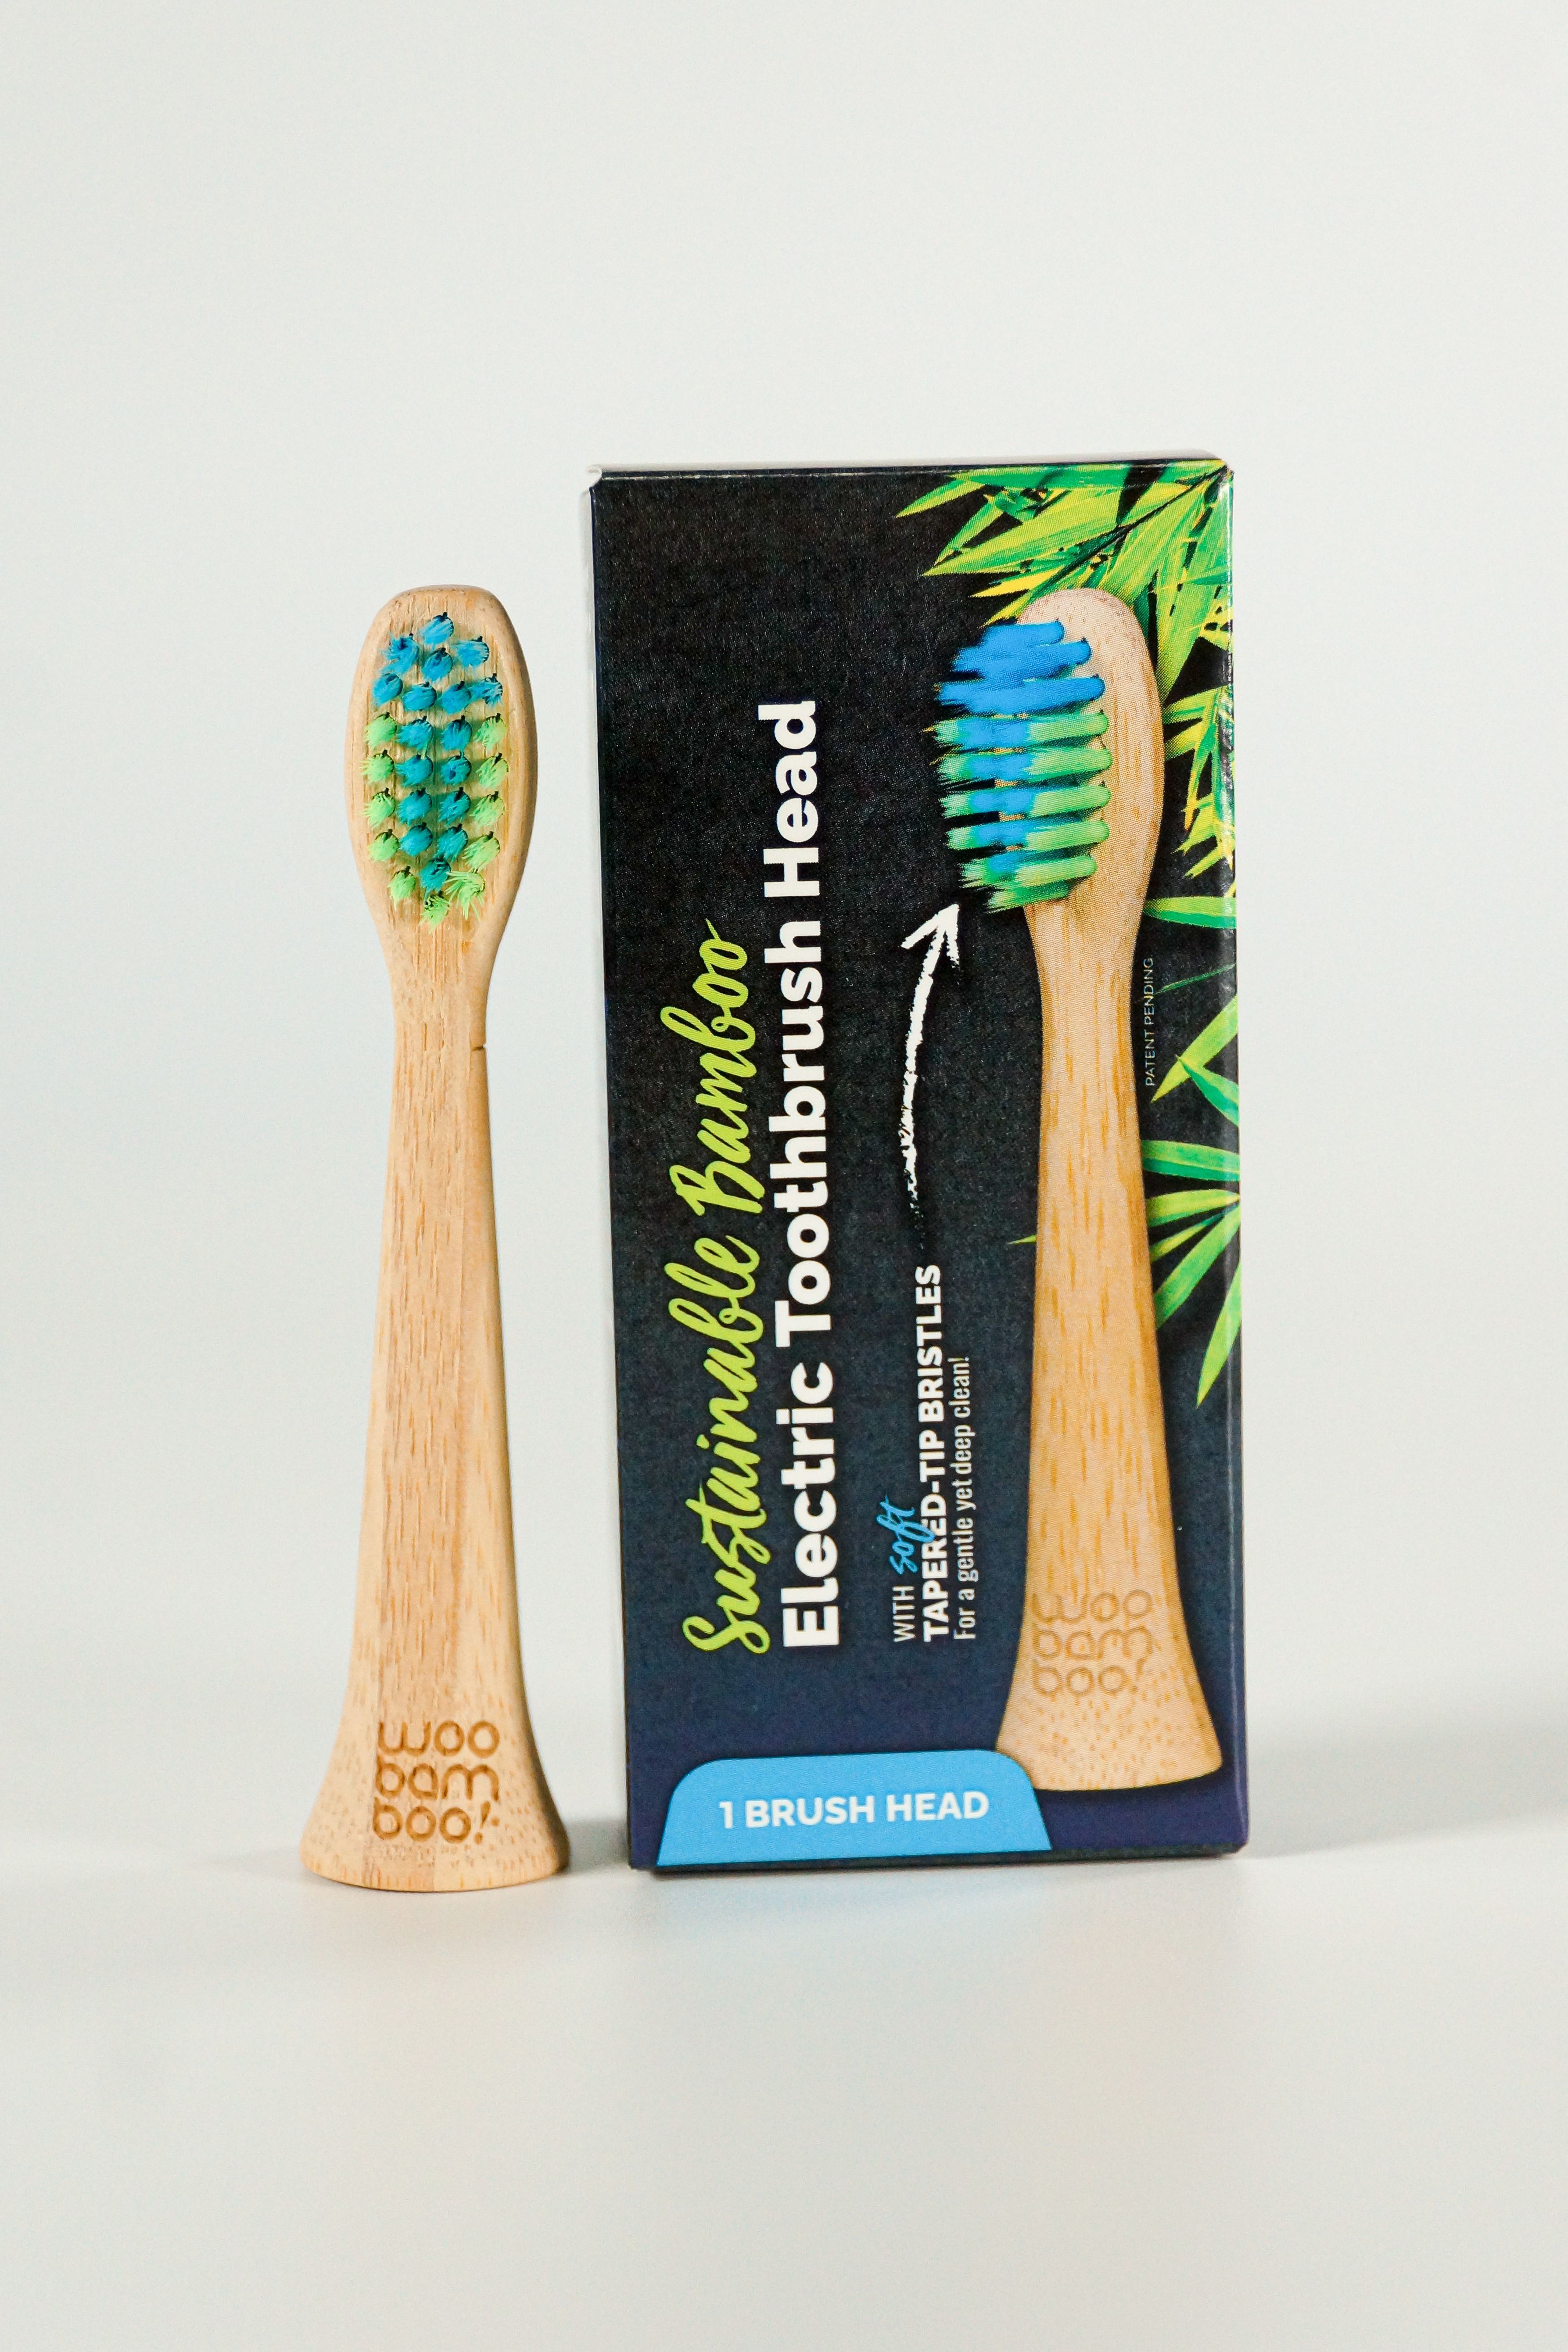 [Electric Toothbrush Heads] WooBamboo Toothbrush Heads